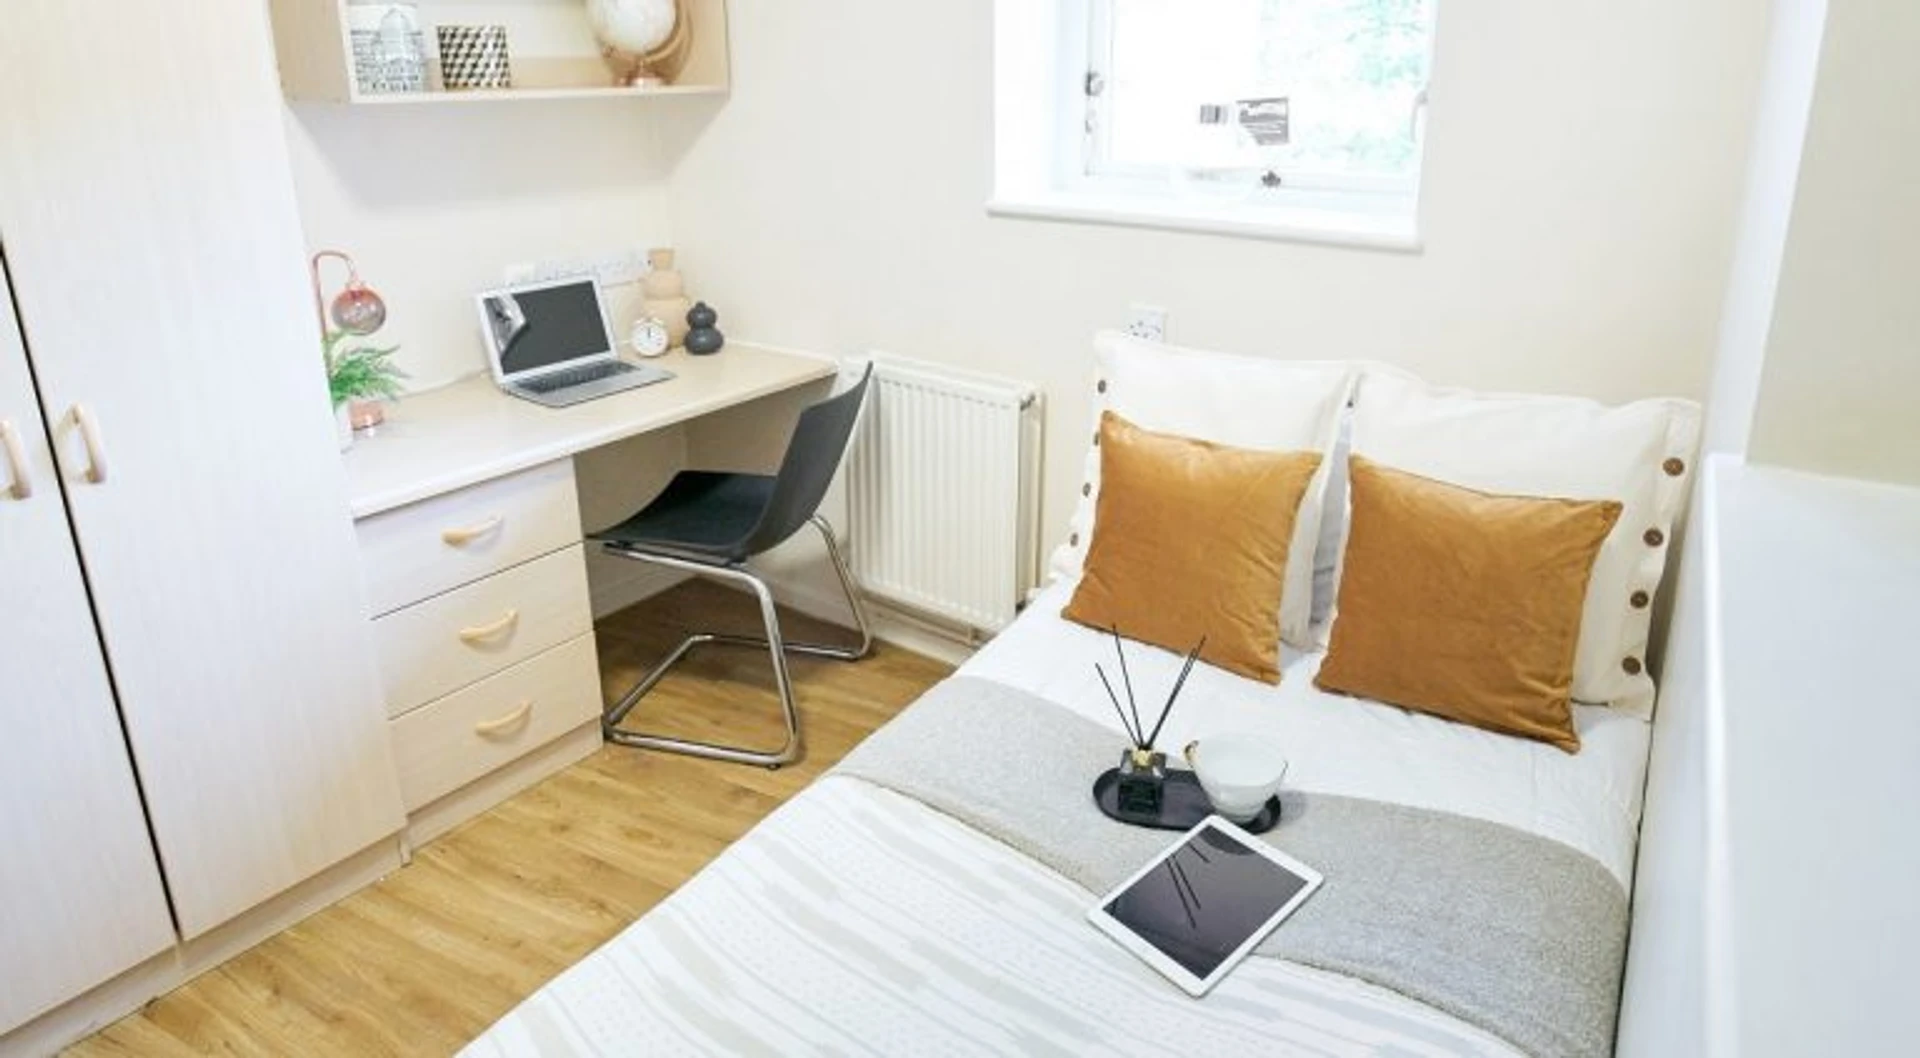 Renting rooms by the month in liverpool